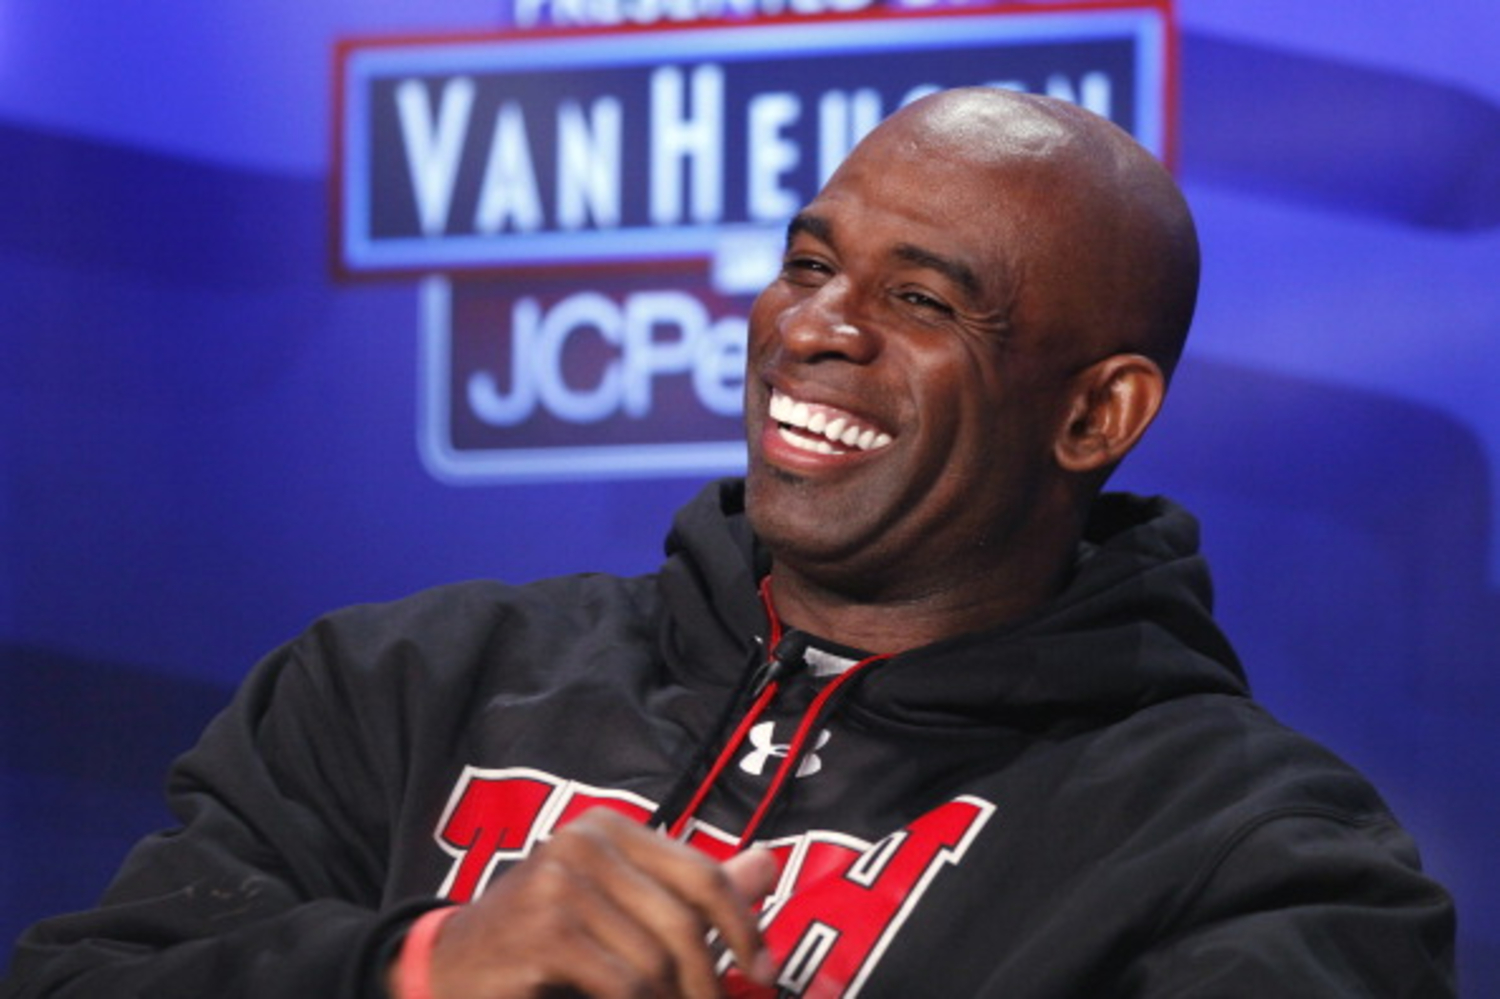 Deion Sanders Just Received Some Exciting News From His Son